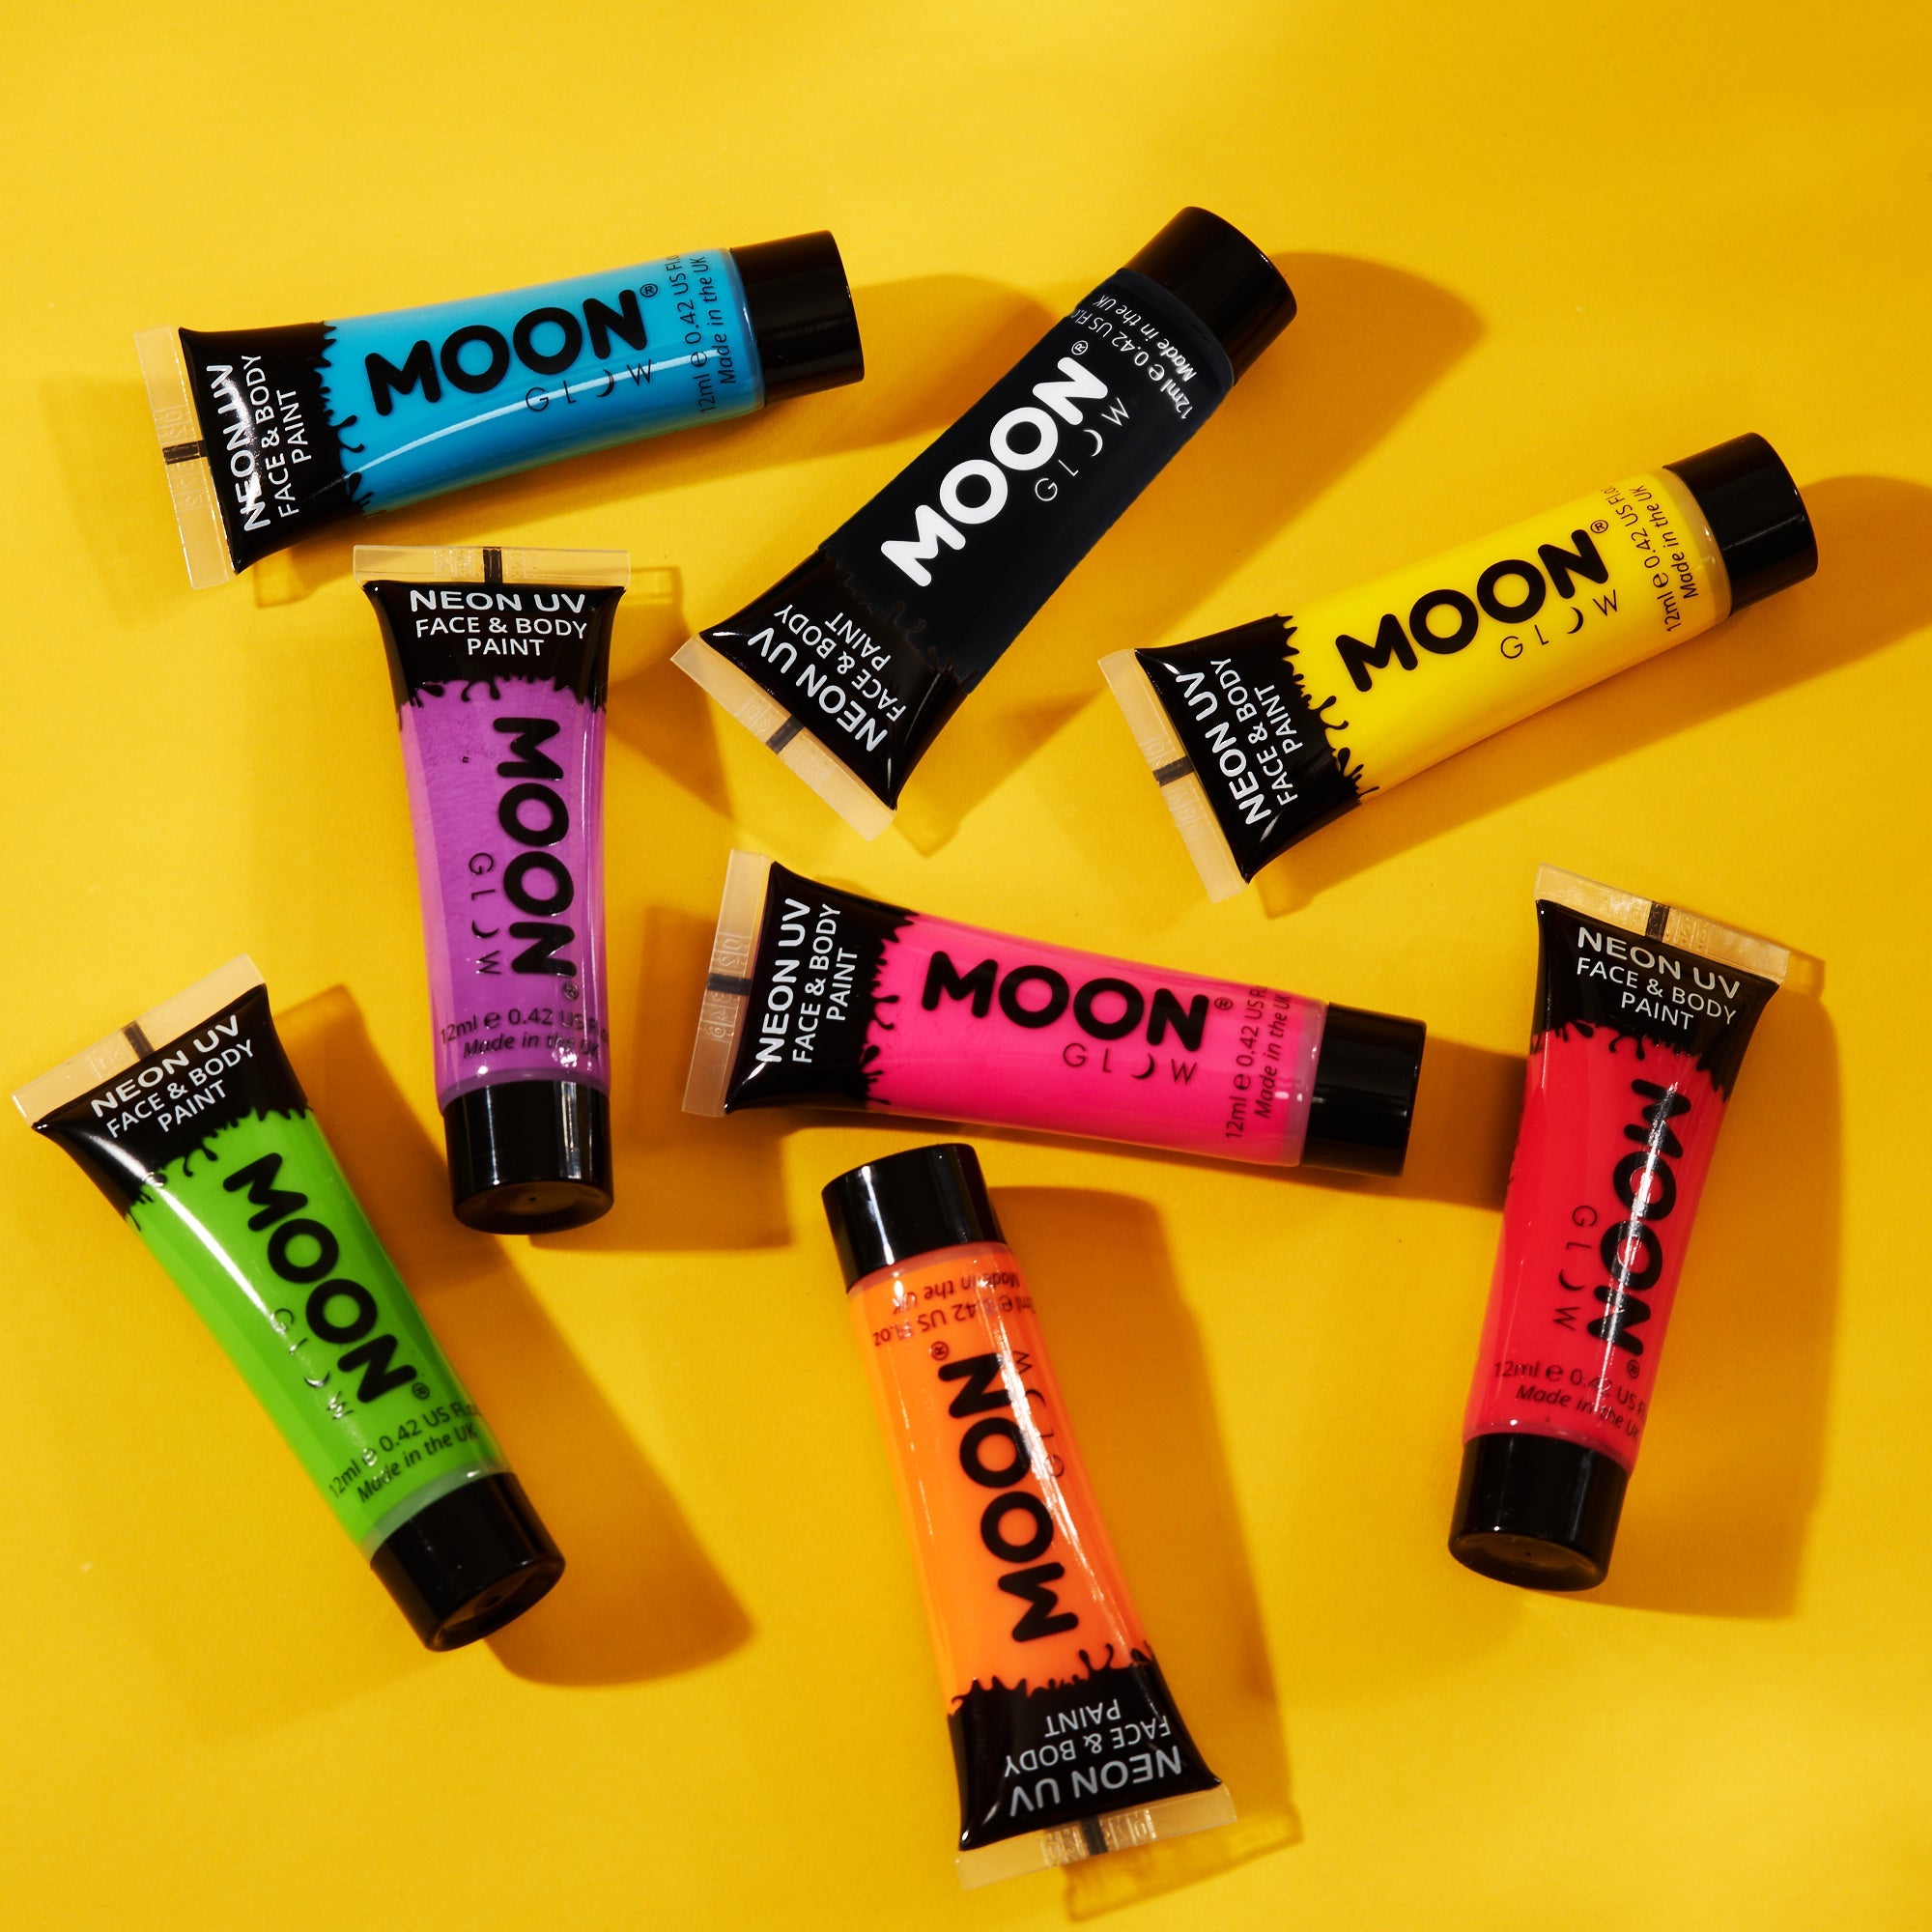 Moon Glow - Neon UV Paint Stick Body Crayon for the Face & Body – Black